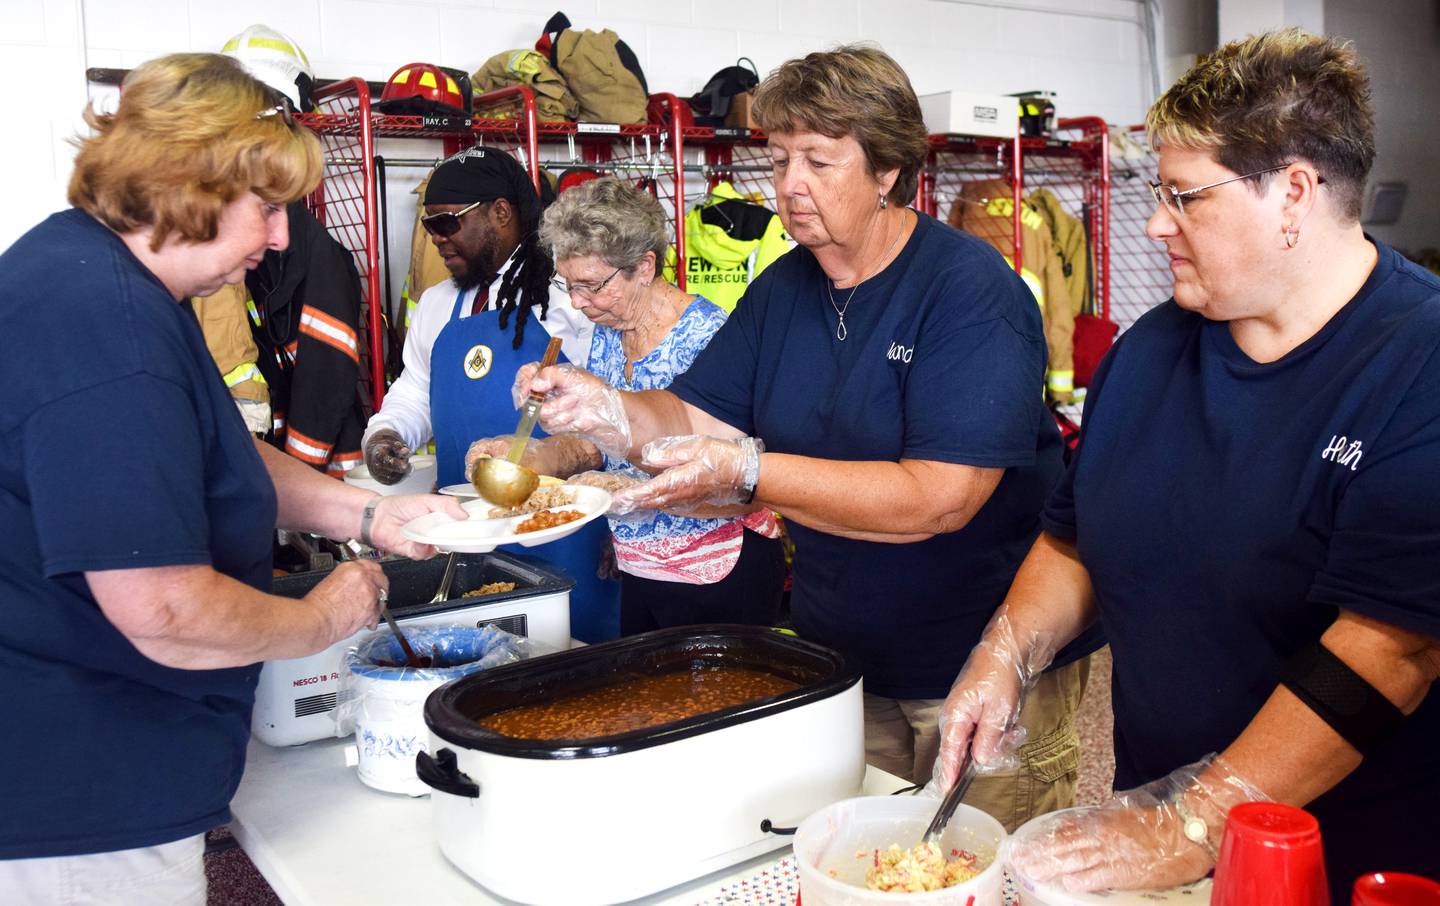 Members of the Order of the Eastern Star serve meals to fellow members and staff at the Newton Fire Department on Aug. 28 at the local fire station. The fraternal organization wanted to show its support for firefighters and paramedics at Newton Fire Department by providing a free meal and a $100 check for the SAFE House Program.